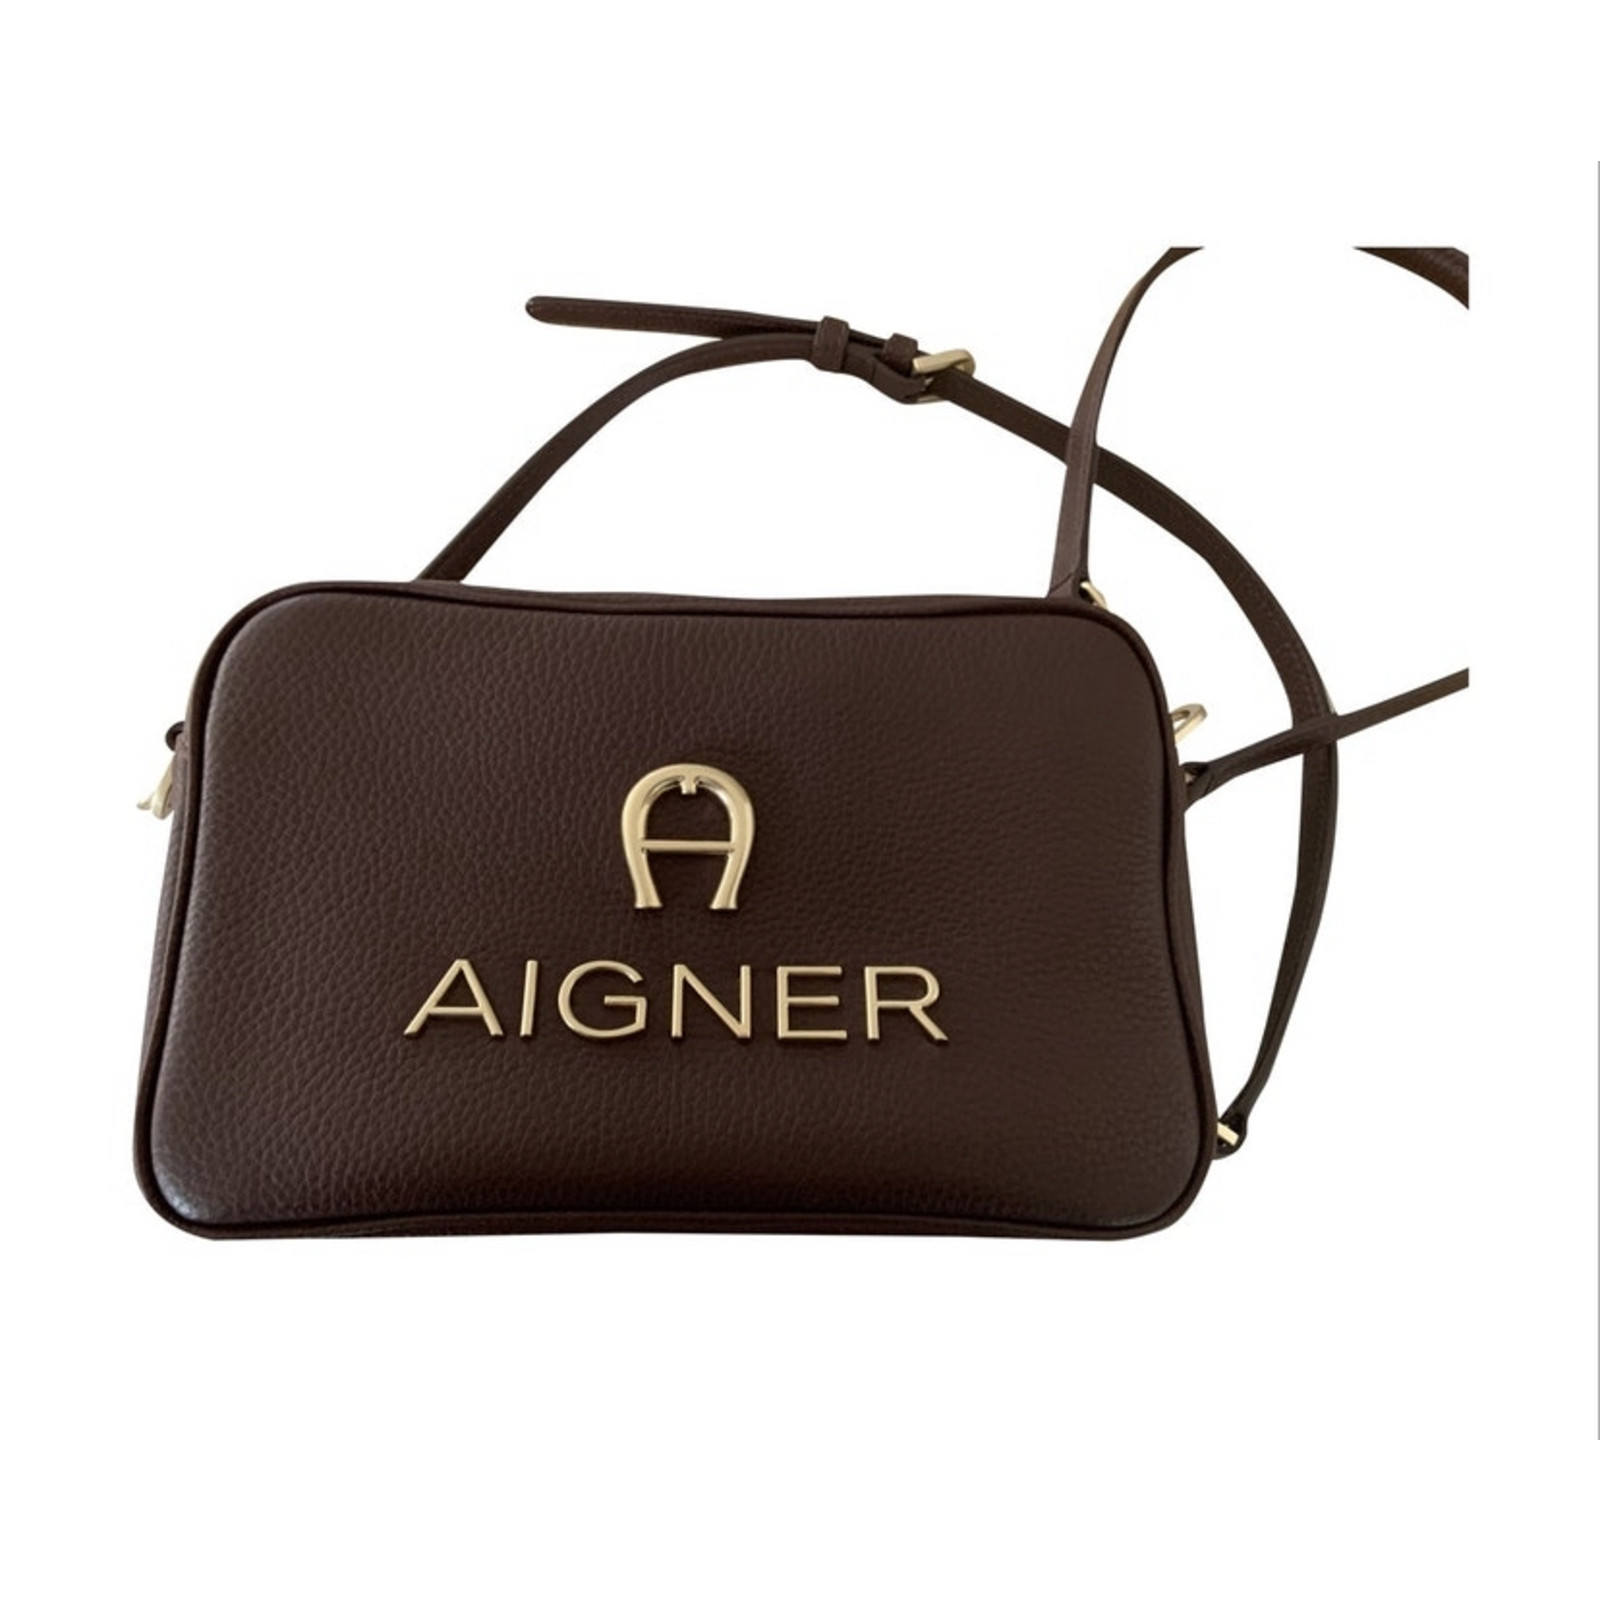 Aigner Shoulder Bag Leather In Bordeaux Second Hand Aigner Shoulder Bag Leather In Bordeaux Buy Used For 299